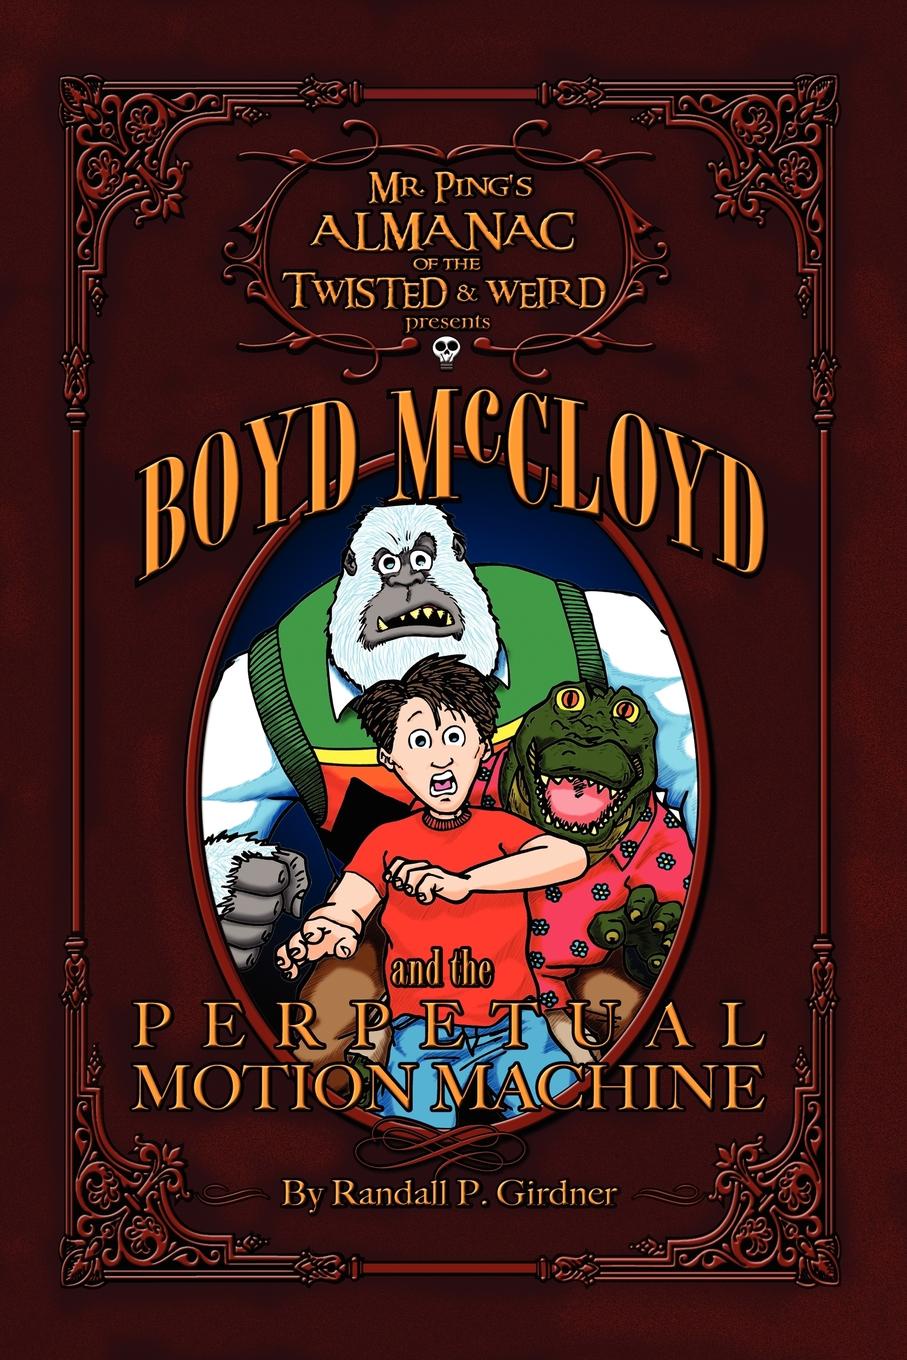 Mr. Ping.s Almanac of the Twisted . Weird presents Boyd McCloyd and the Perpetual Motion Machine